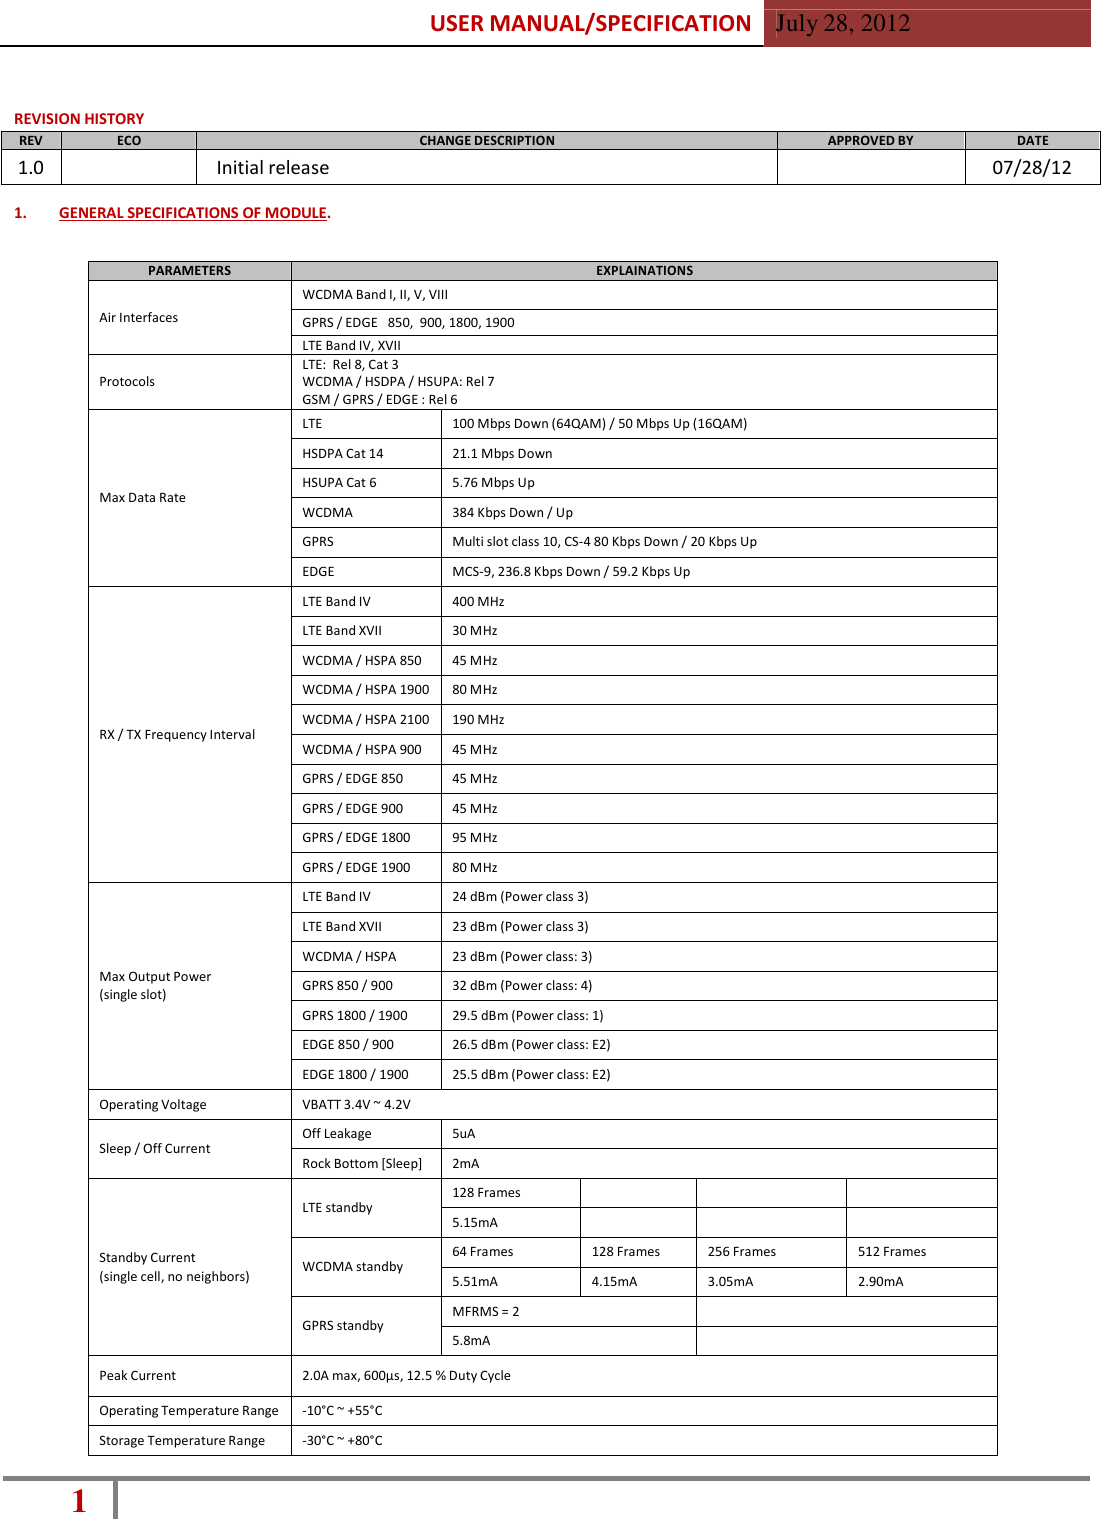 USER MANUAL/SPECIFICATION  July 28, 2012 1      REVISION HISTORY  REV ECO CHANGE DESCRIPTION APPROVED BY DATE 1.0  Initial release  07/28/12  1. GENERAL SPECIFICATIONS OF MODULE.   PARAMETERS EXPLAINATIONS  Air Interfaces WCDMA Band I, II, V, VIII GPRS / EDGE   850,  900, 1800, 1900 LTE Band IV, XVII  Protocols LTE:  Rel 8, Cat 3 WCDMA / HSDPA / HSUPA: Rel 7 GSM / GPRS / EDGE : Rel 6     Max Data Rate LTE 100 Mbps Down (64QAM) / 50 Mbps Up (16QAM) HSDPA Cat 14 21.1 Mbps Down HSUPA Cat 6 5.76 Mbps Up WCDMA 384 Kbps Down / Up GPRS Multi slot class 10, CS-4 80 Kbps Down / 20 Kbps Up EDGE MCS-9, 236.8 Kbps Down / 59.2 Kbps Up        RX / TX Frequency Interval LTE Band IV 400 MHz LTE Band XVII 30 MHz WCDMA / HSPA 850 45 MHz WCDMA / HSPA 1900 80 MHz WCDMA / HSPA 2100 190 MHz WCDMA / HSPA 900 45 MHz GPRS / EDGE 850 45 MHz GPRS / EDGE 900 45 MHz GPRS / EDGE 1800 95 MHz GPRS / EDGE 1900 80 MHz     Max Output Power (single slot) LTE Band IV 24 dBm (Power class 3) LTE Band XVII 23 dBm (Power class 3) WCDMA / HSPA 23 dBm (Power class: 3) GPRS 850 / 900 32 dBm (Power class: 4) GPRS 1800 / 1900 29.5 dBm (Power class: 1) EDGE 850 / 900 26.5 dBm (Power class: E2) EDGE 1800 / 1900 25.5 dBm (Power class: E2) Operating Voltage VBATT 3.4V ~ 4.2V  Sleep / Off Current Off Leakage 5uA Rock Bottom [Sleep] 2mA    Standby Current (single cell, no neighbors)  LTE standby 128 Frames    5.15mA     WCDMA standby 64 Frames 128 Frames 256 Frames 512 Frames 5.51mA 4.15mA 3.05mA 2.90mA  GPRS standby MFRMS = 2  5.8mA   Peak Current  2.0A max, 600µs, 12.5 % Duty Cycle Operating Temperature Range -10°C ~ +55°C Storage Temperature Range -30°C ~ +80°C 